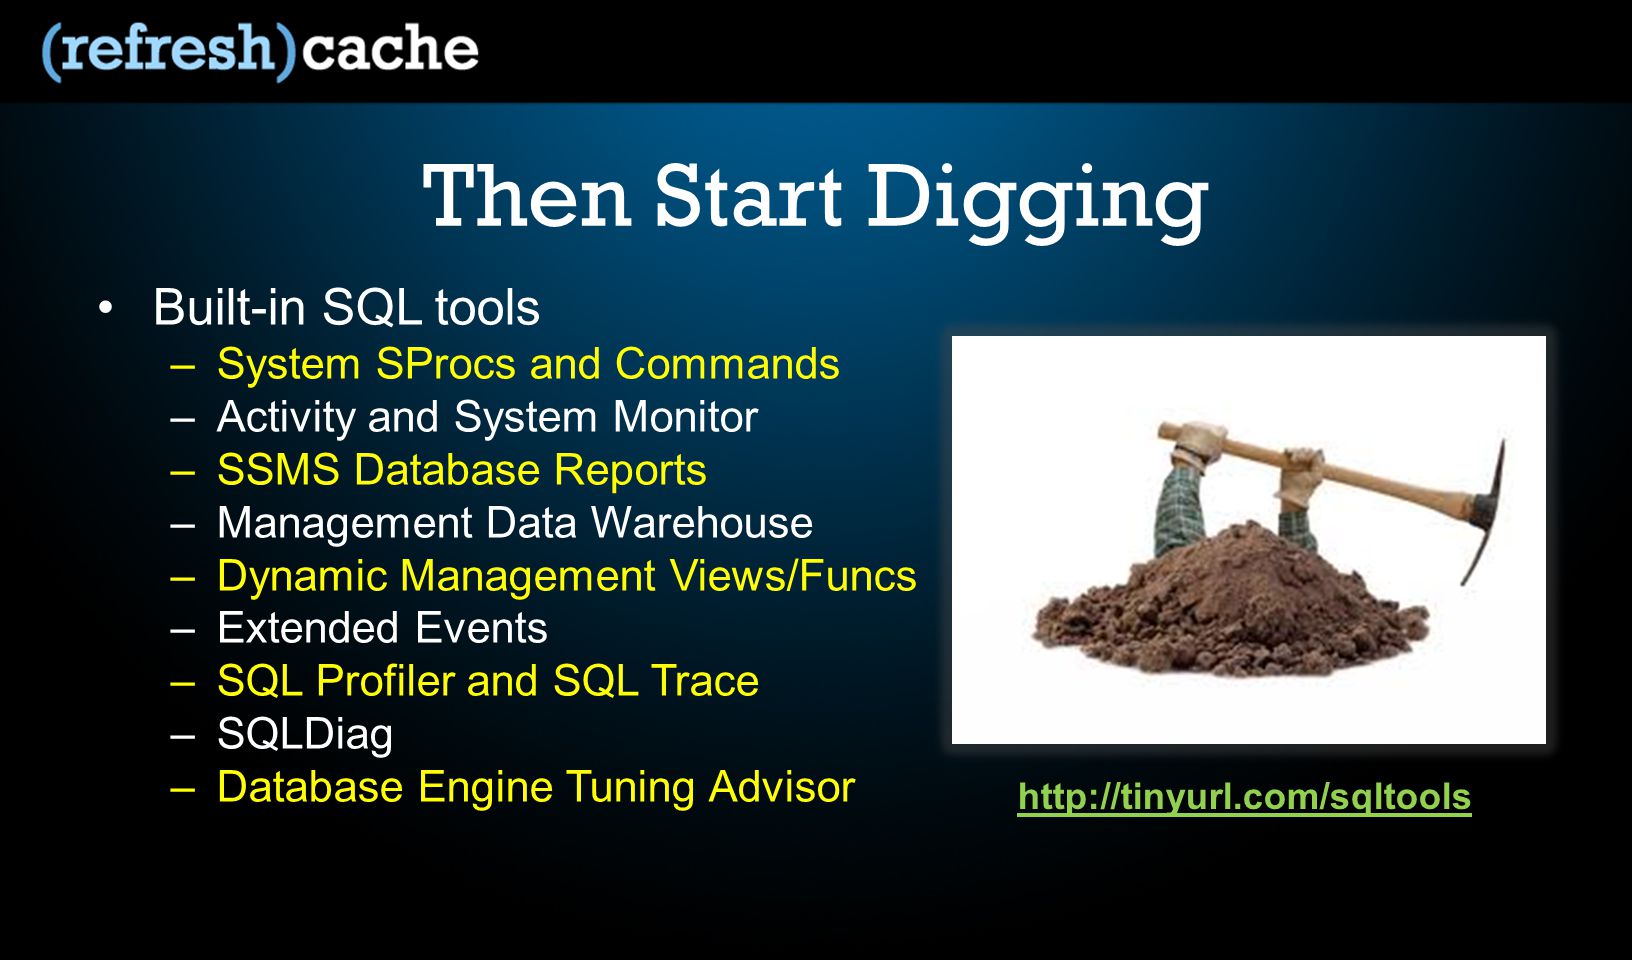 Then Start Digging Built-in SQL tools –System SProcs and Commands –Activity and System Monitor –SSMS Database Reports –Management Data Warehouse –Dynamic Management Views/Funcs –Extended Events –SQL Profiler and SQL Trace –SQLDiag –Database Engine Tuning Advisor